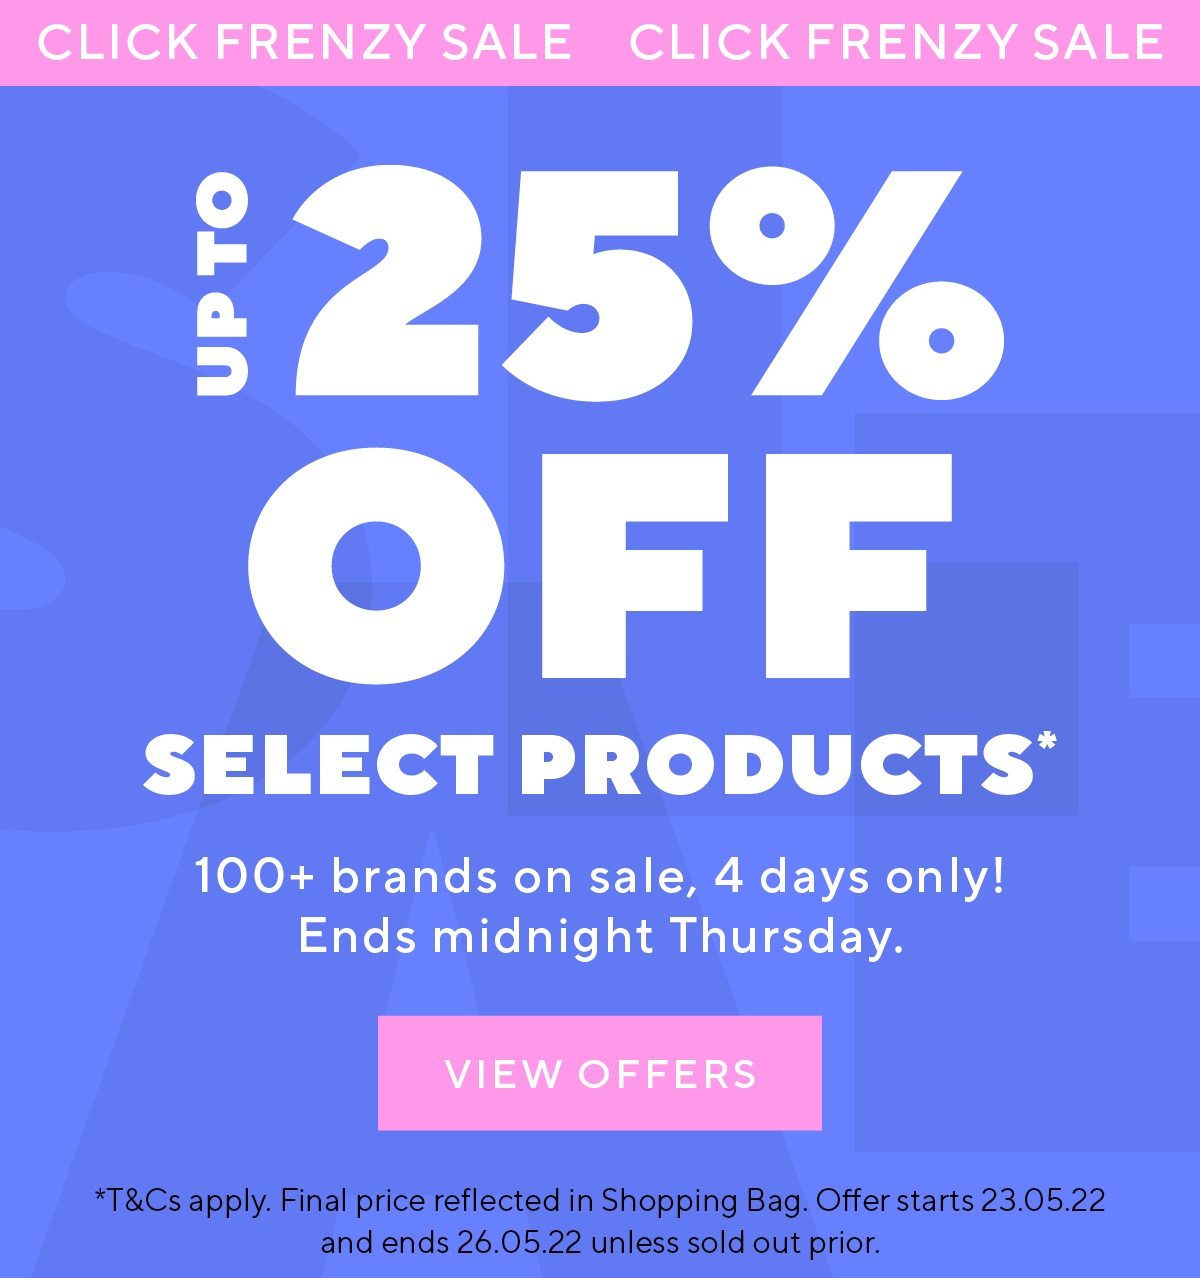 CLICK FRENZY SALE